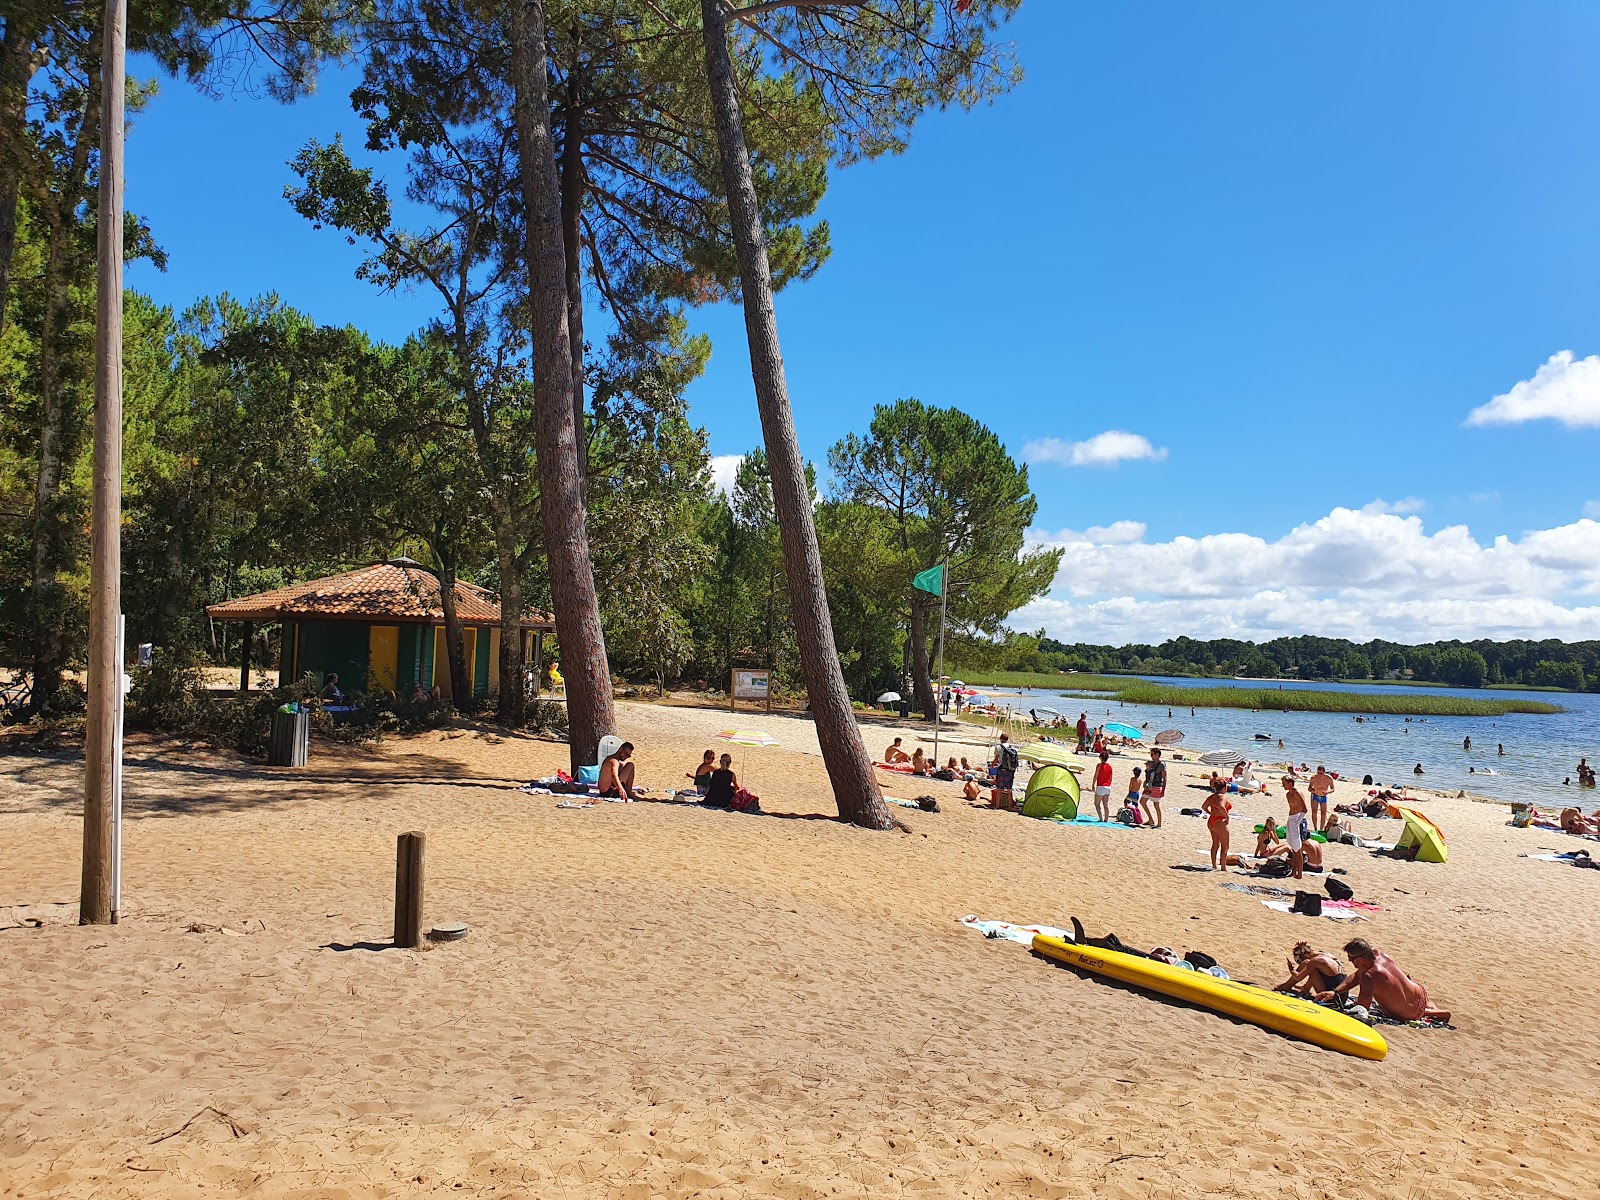 Photo of Sanguinet plage located in natural area